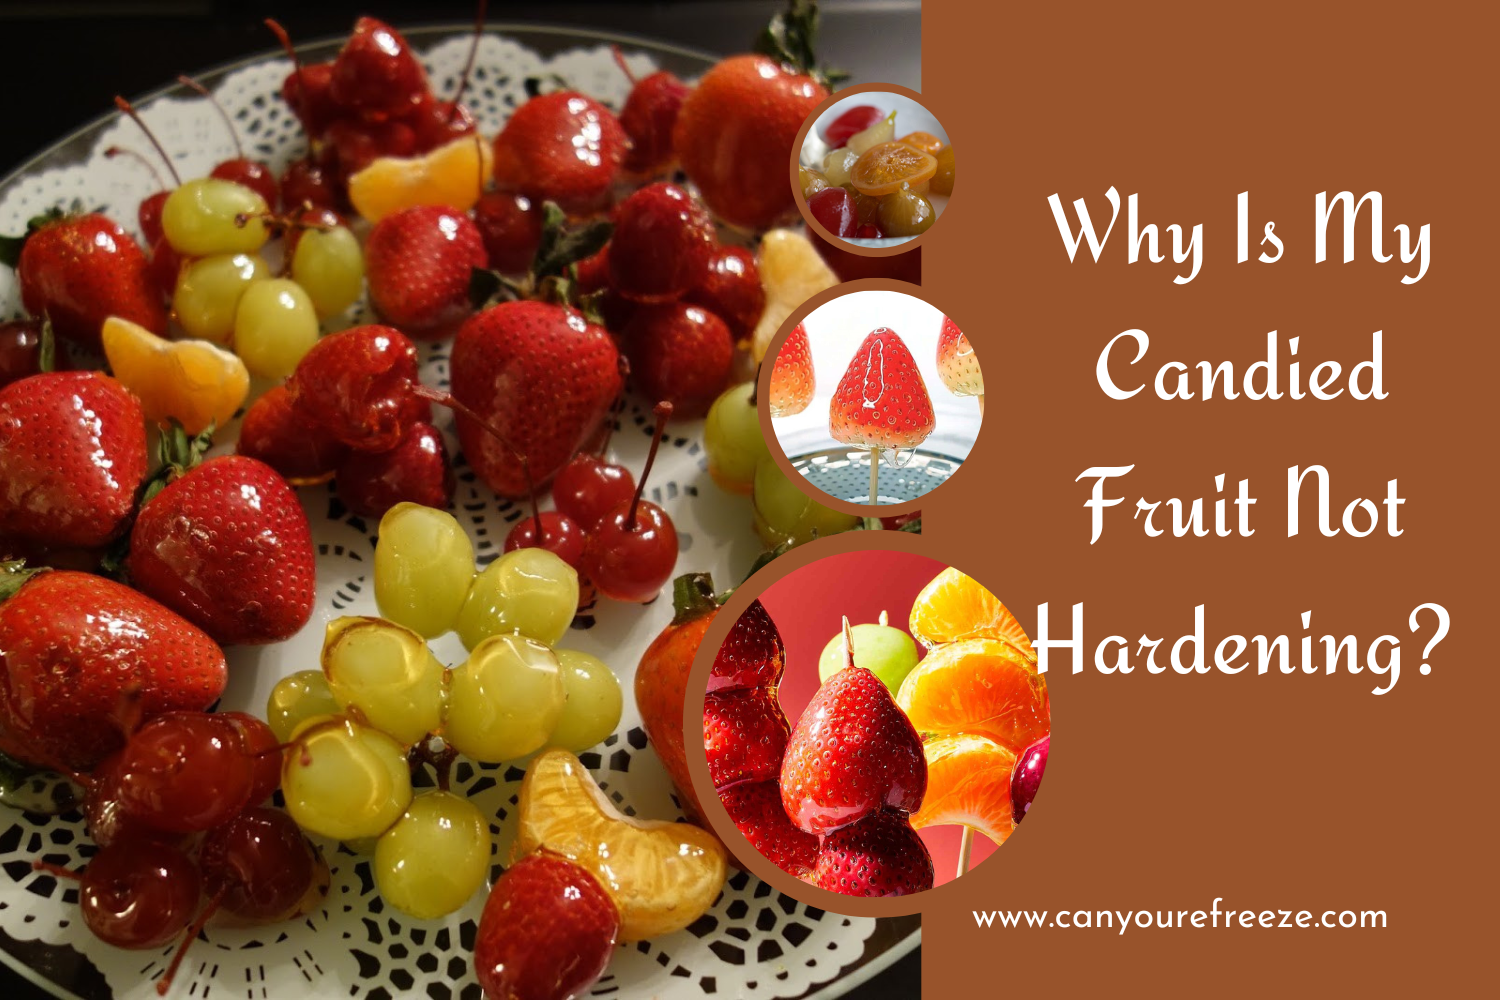 Why Is My Candied Fruit Not Hardening